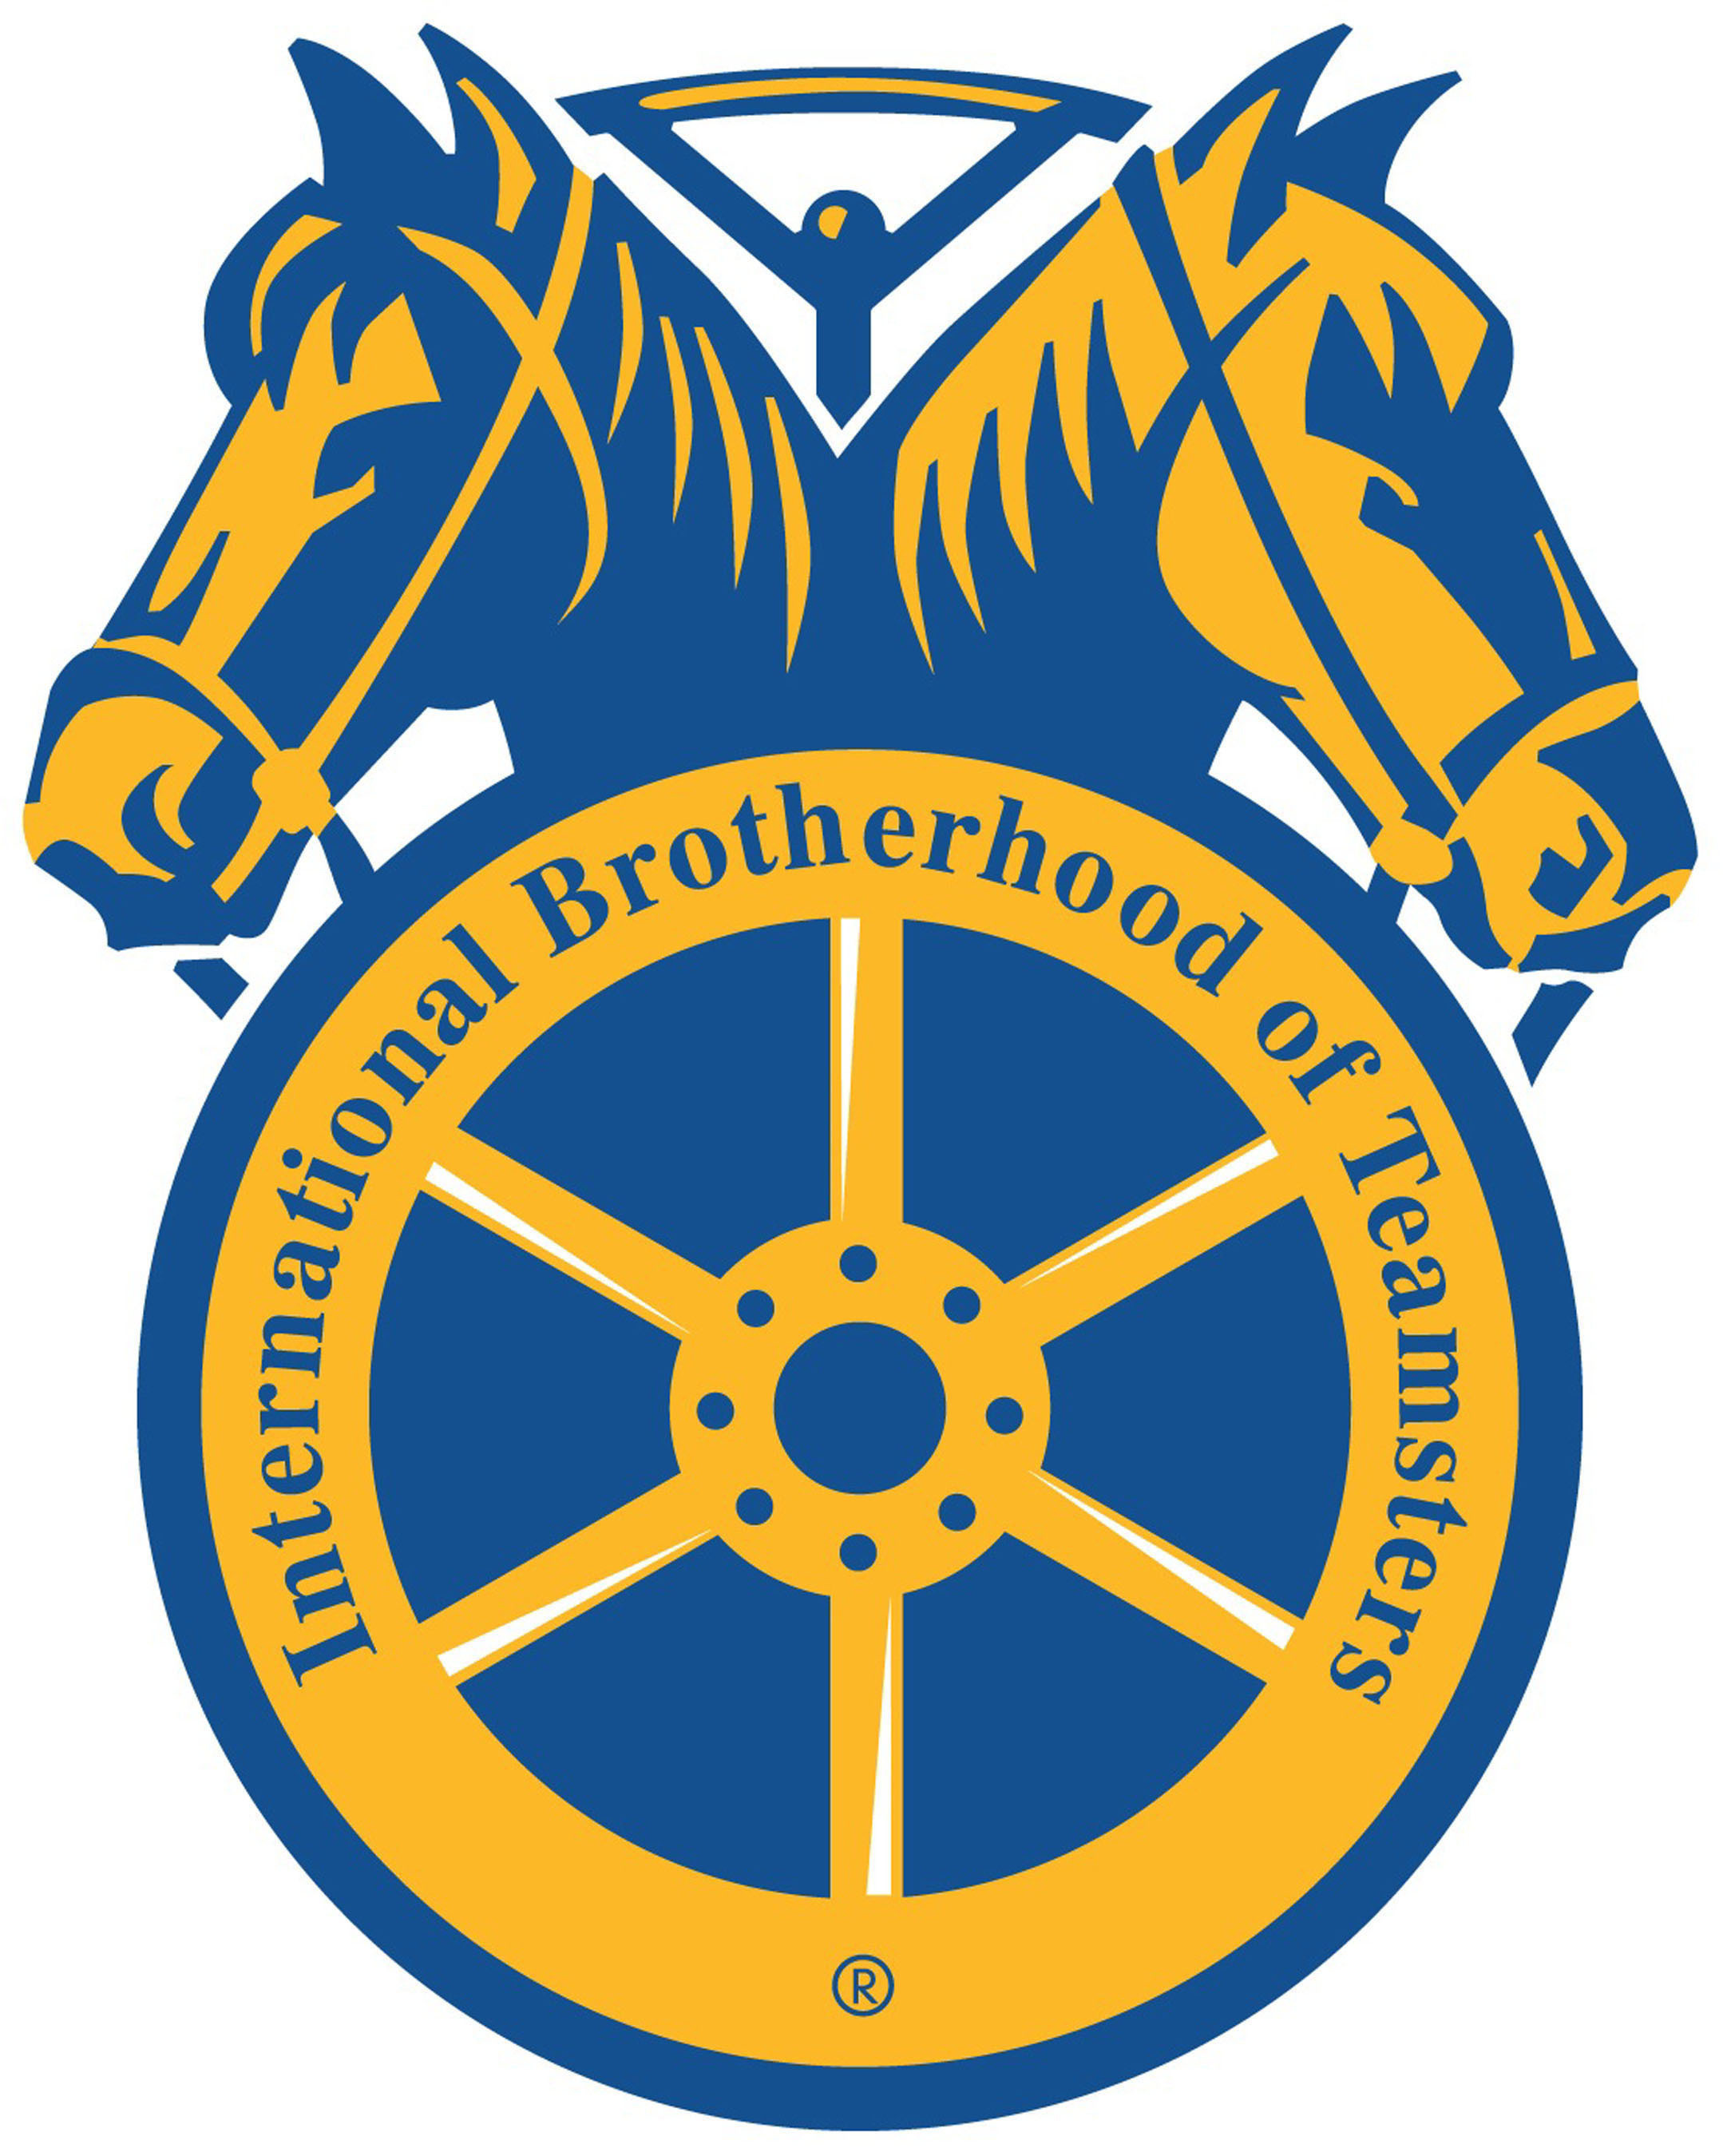 FIRST STUDENT WORKERS OF WILL COUNTY RATIFY CONTRACT WITH TEAMSTERS LOCAL 179